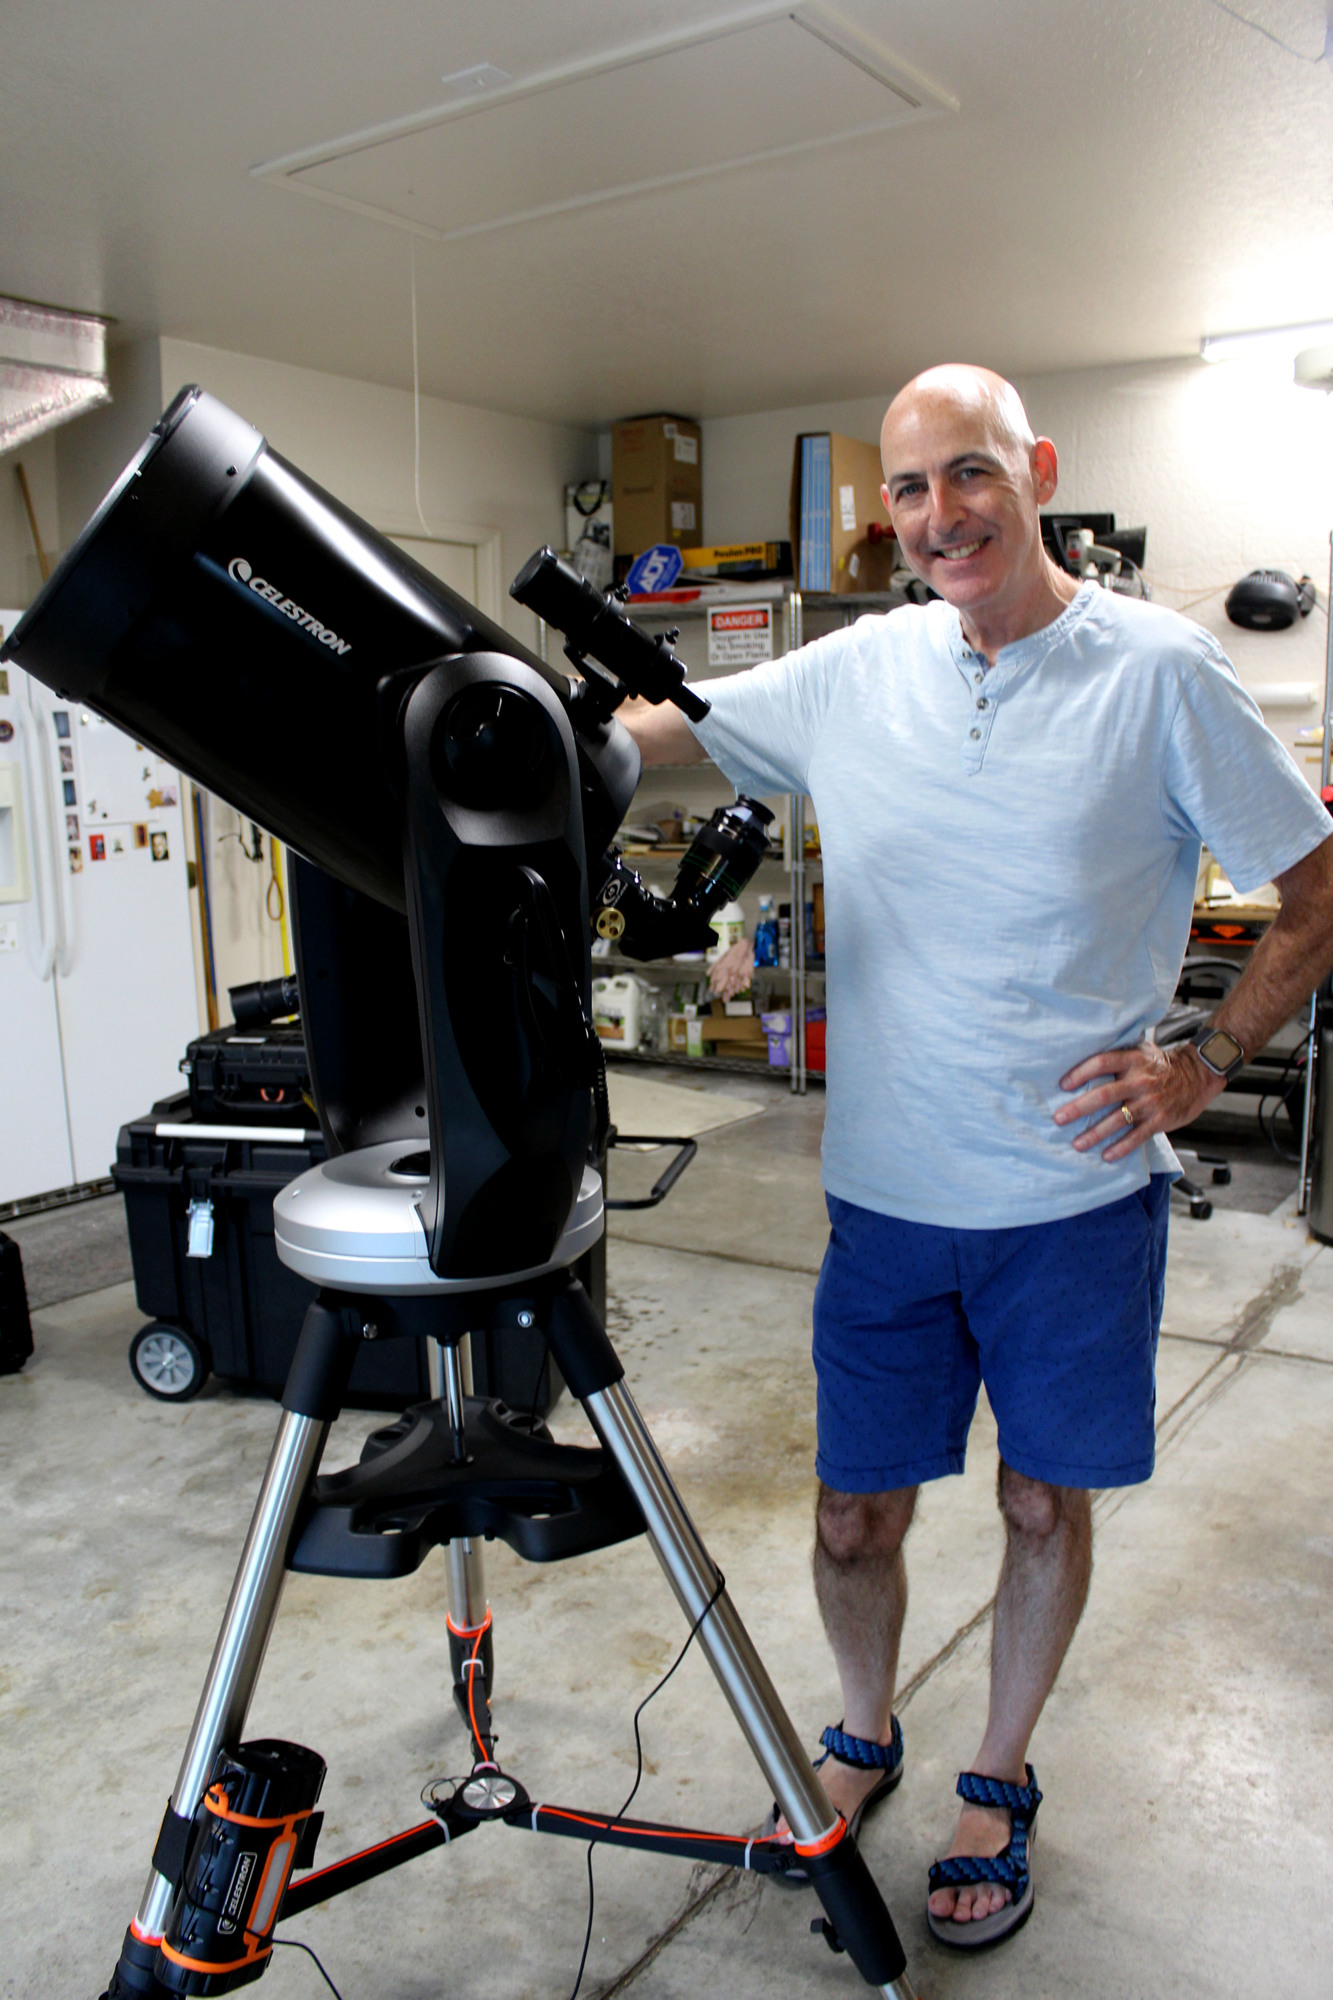 Jonathan Sabin, the president of the Local Group of Deep Sky Observers, regularly takes his telescope to public events to encourage others to look at the skies. Brynn Mechem